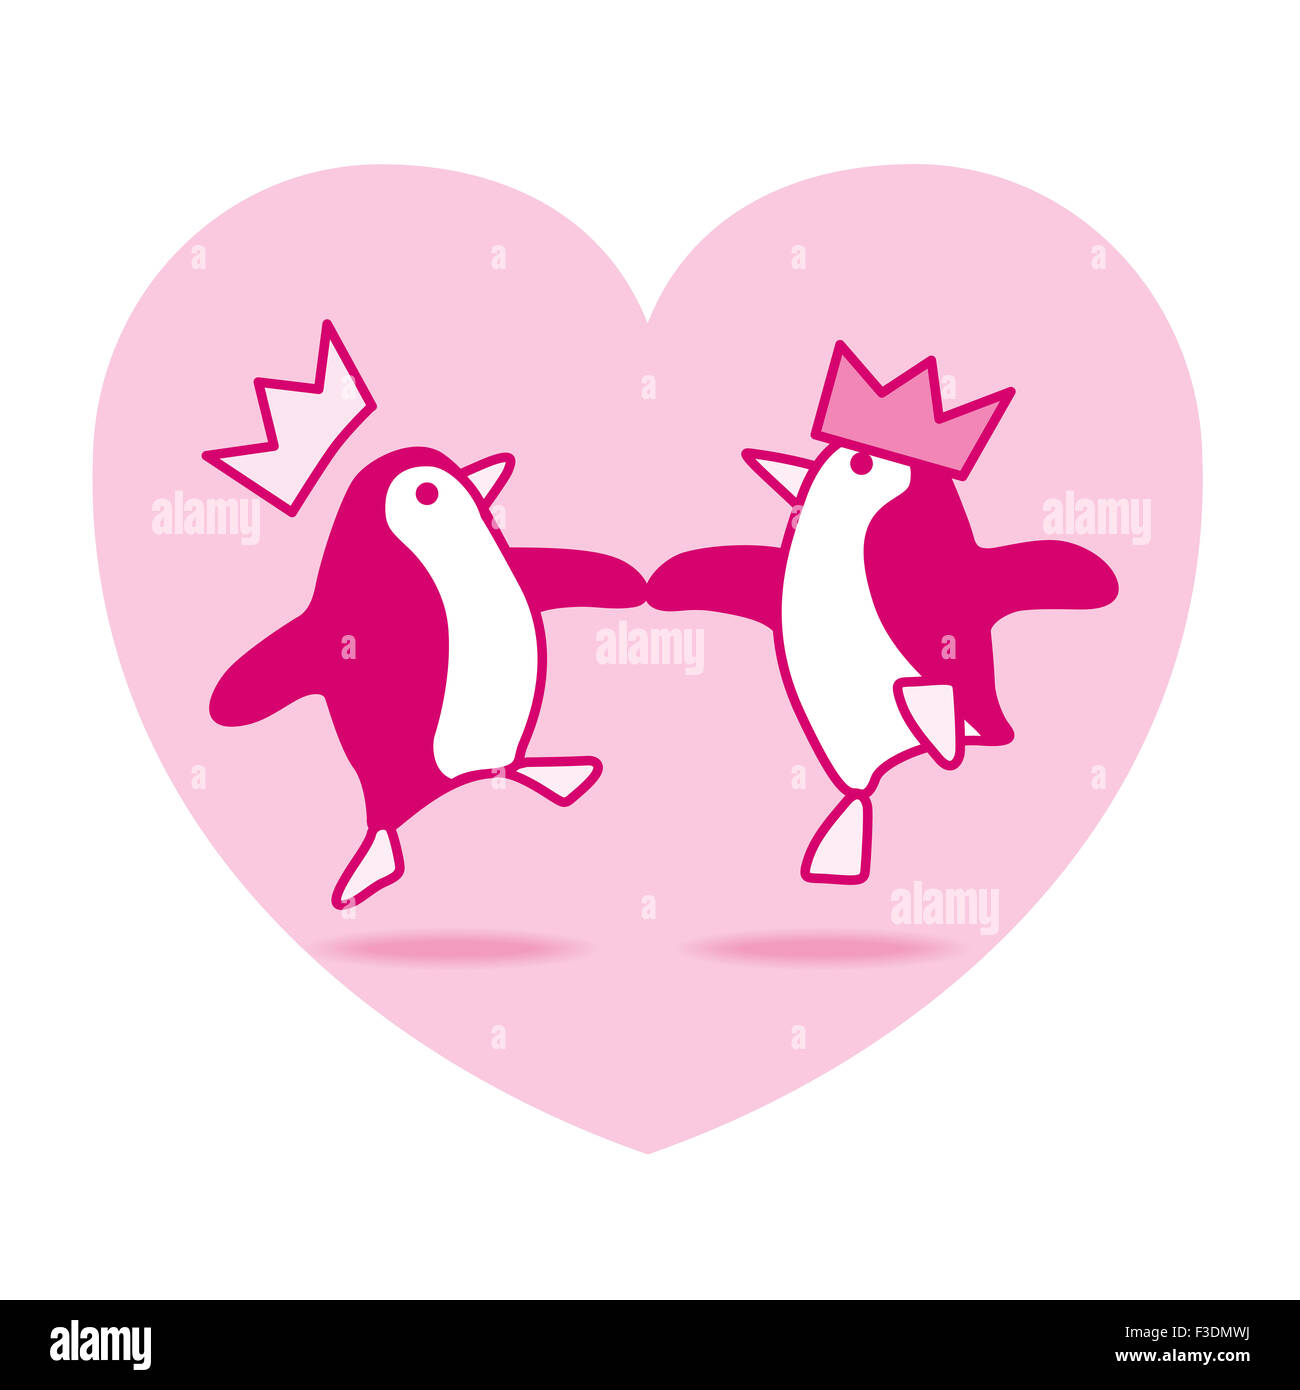 Two Happy Pink Penguins with Paper Hats Dancing with Pink Heart on White Background Stock Photo